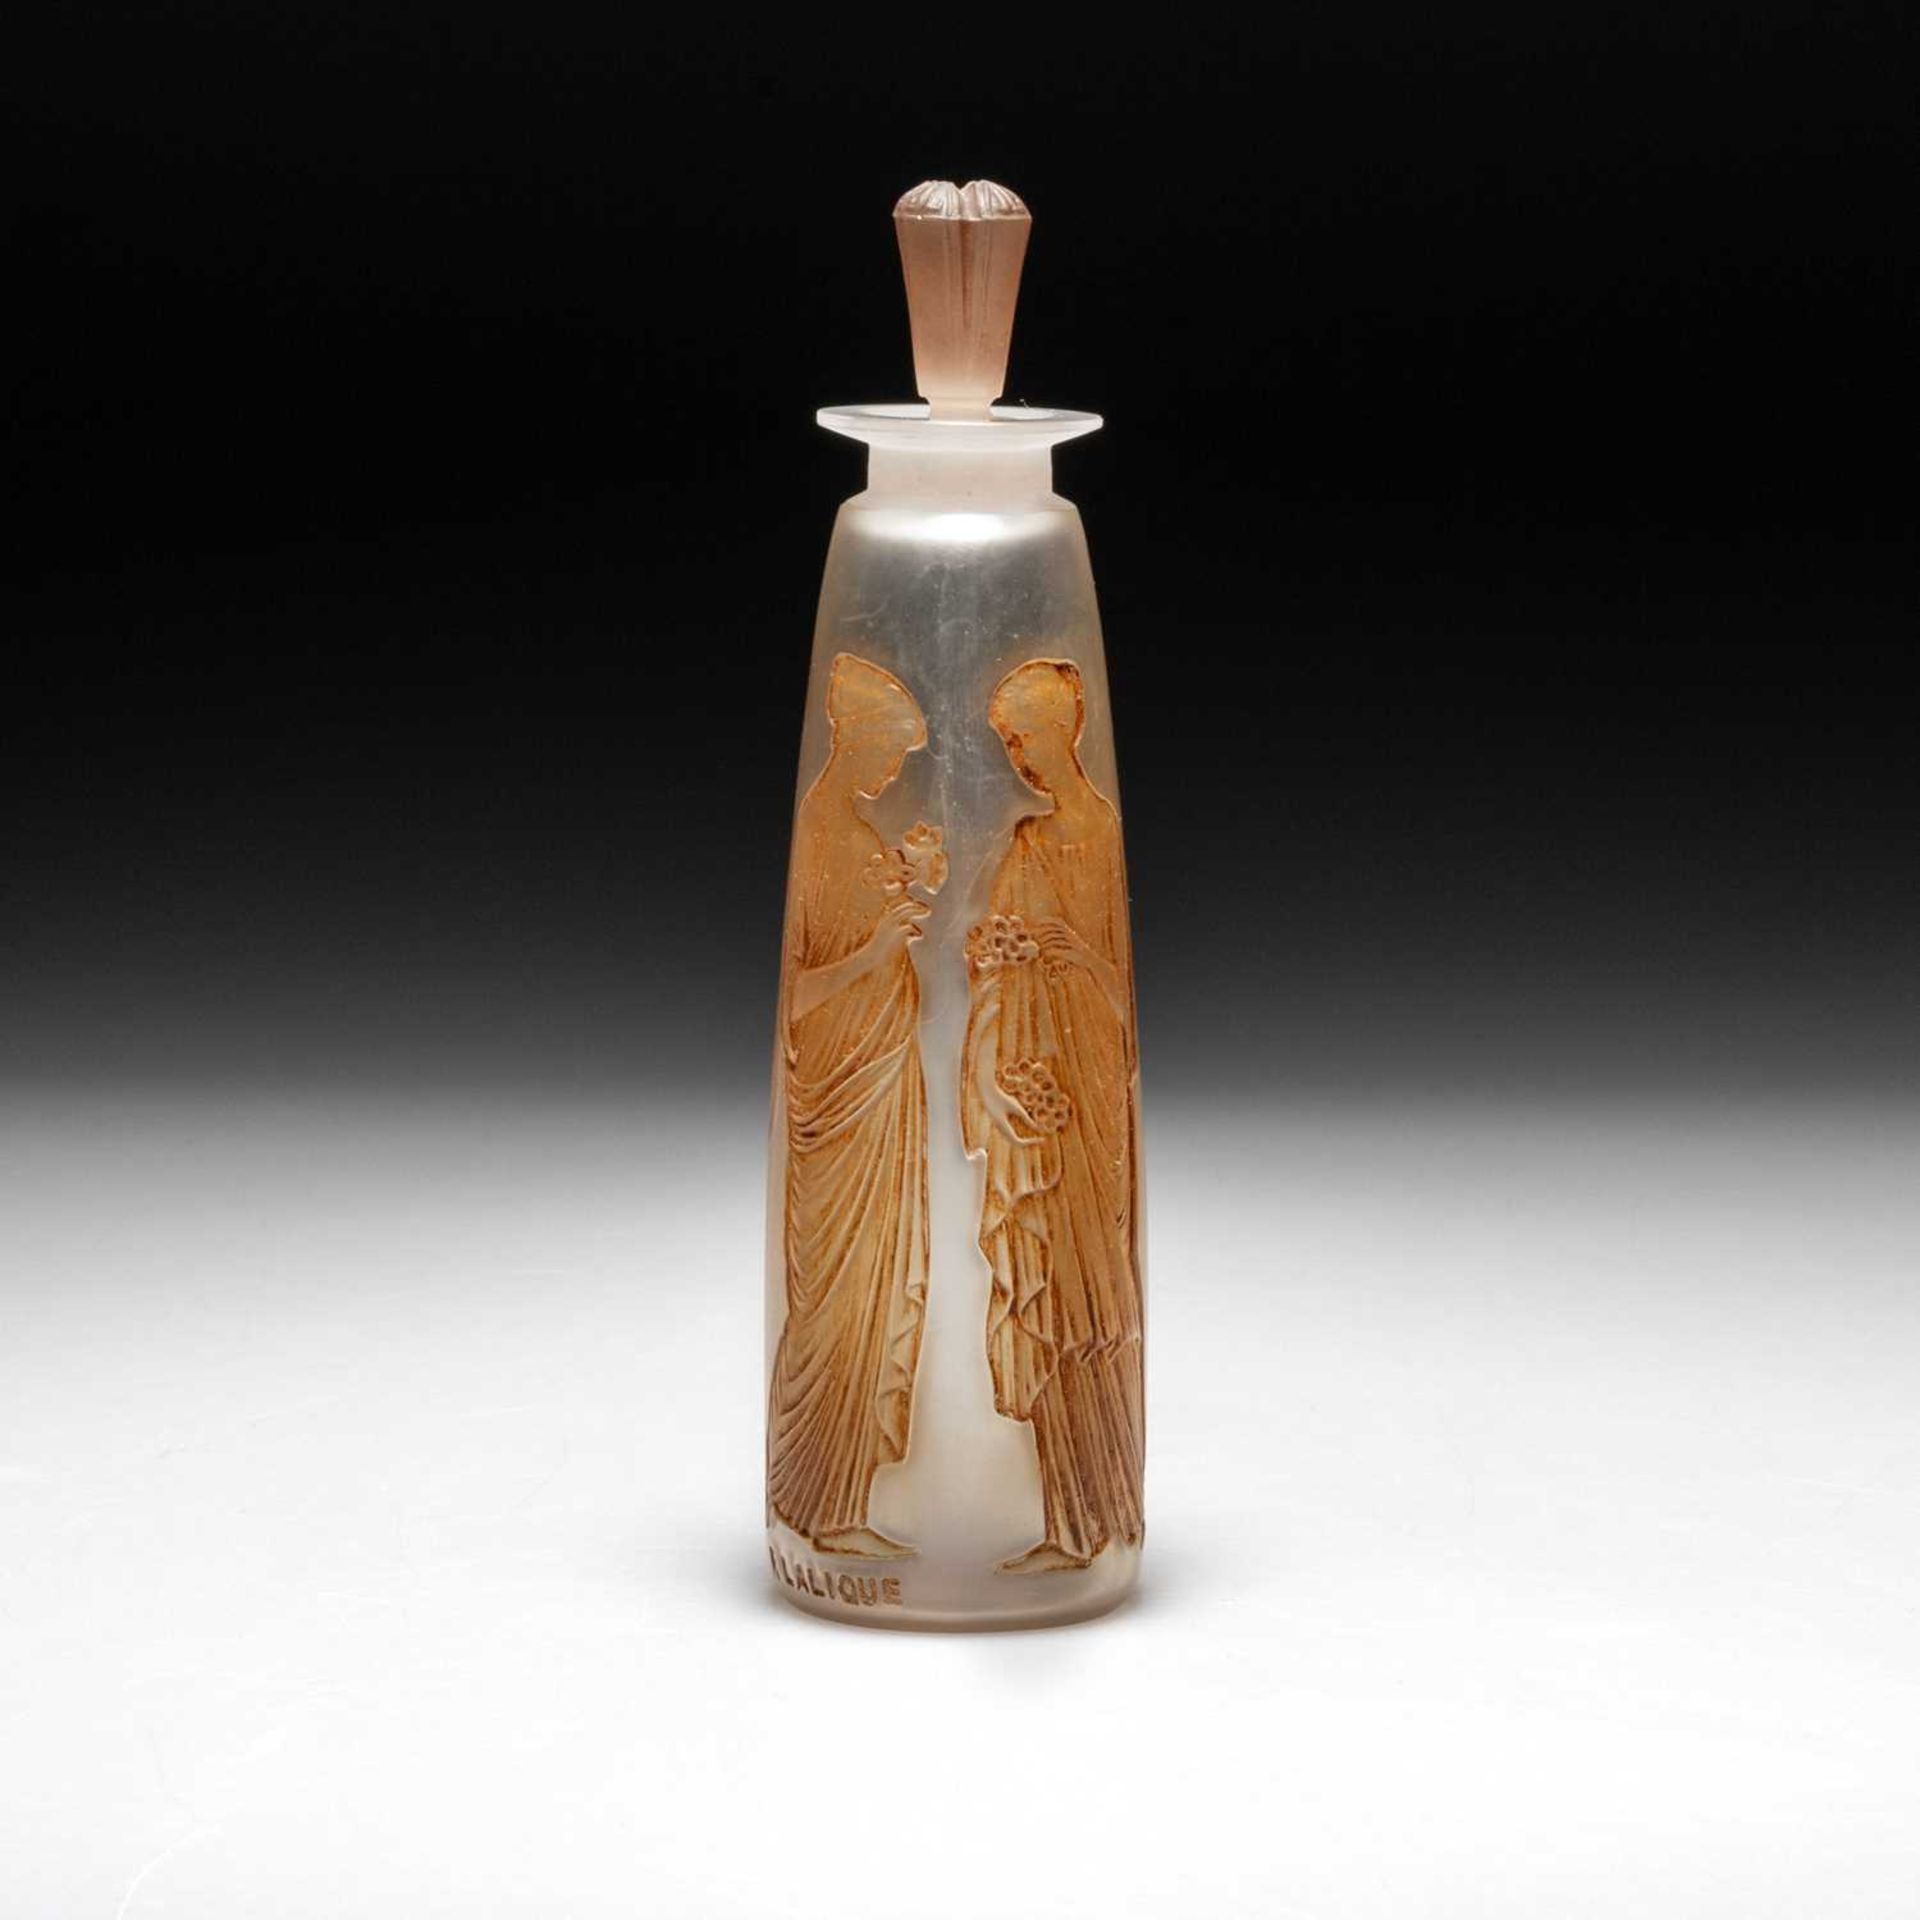 RENÉ LALIQUE (FRENCH, 1860-1945), AN 'AMBRE ANTIQUE' PERFUME BOTTLE AND STOPPER, DESIGNED 1910 - Image 2 of 4